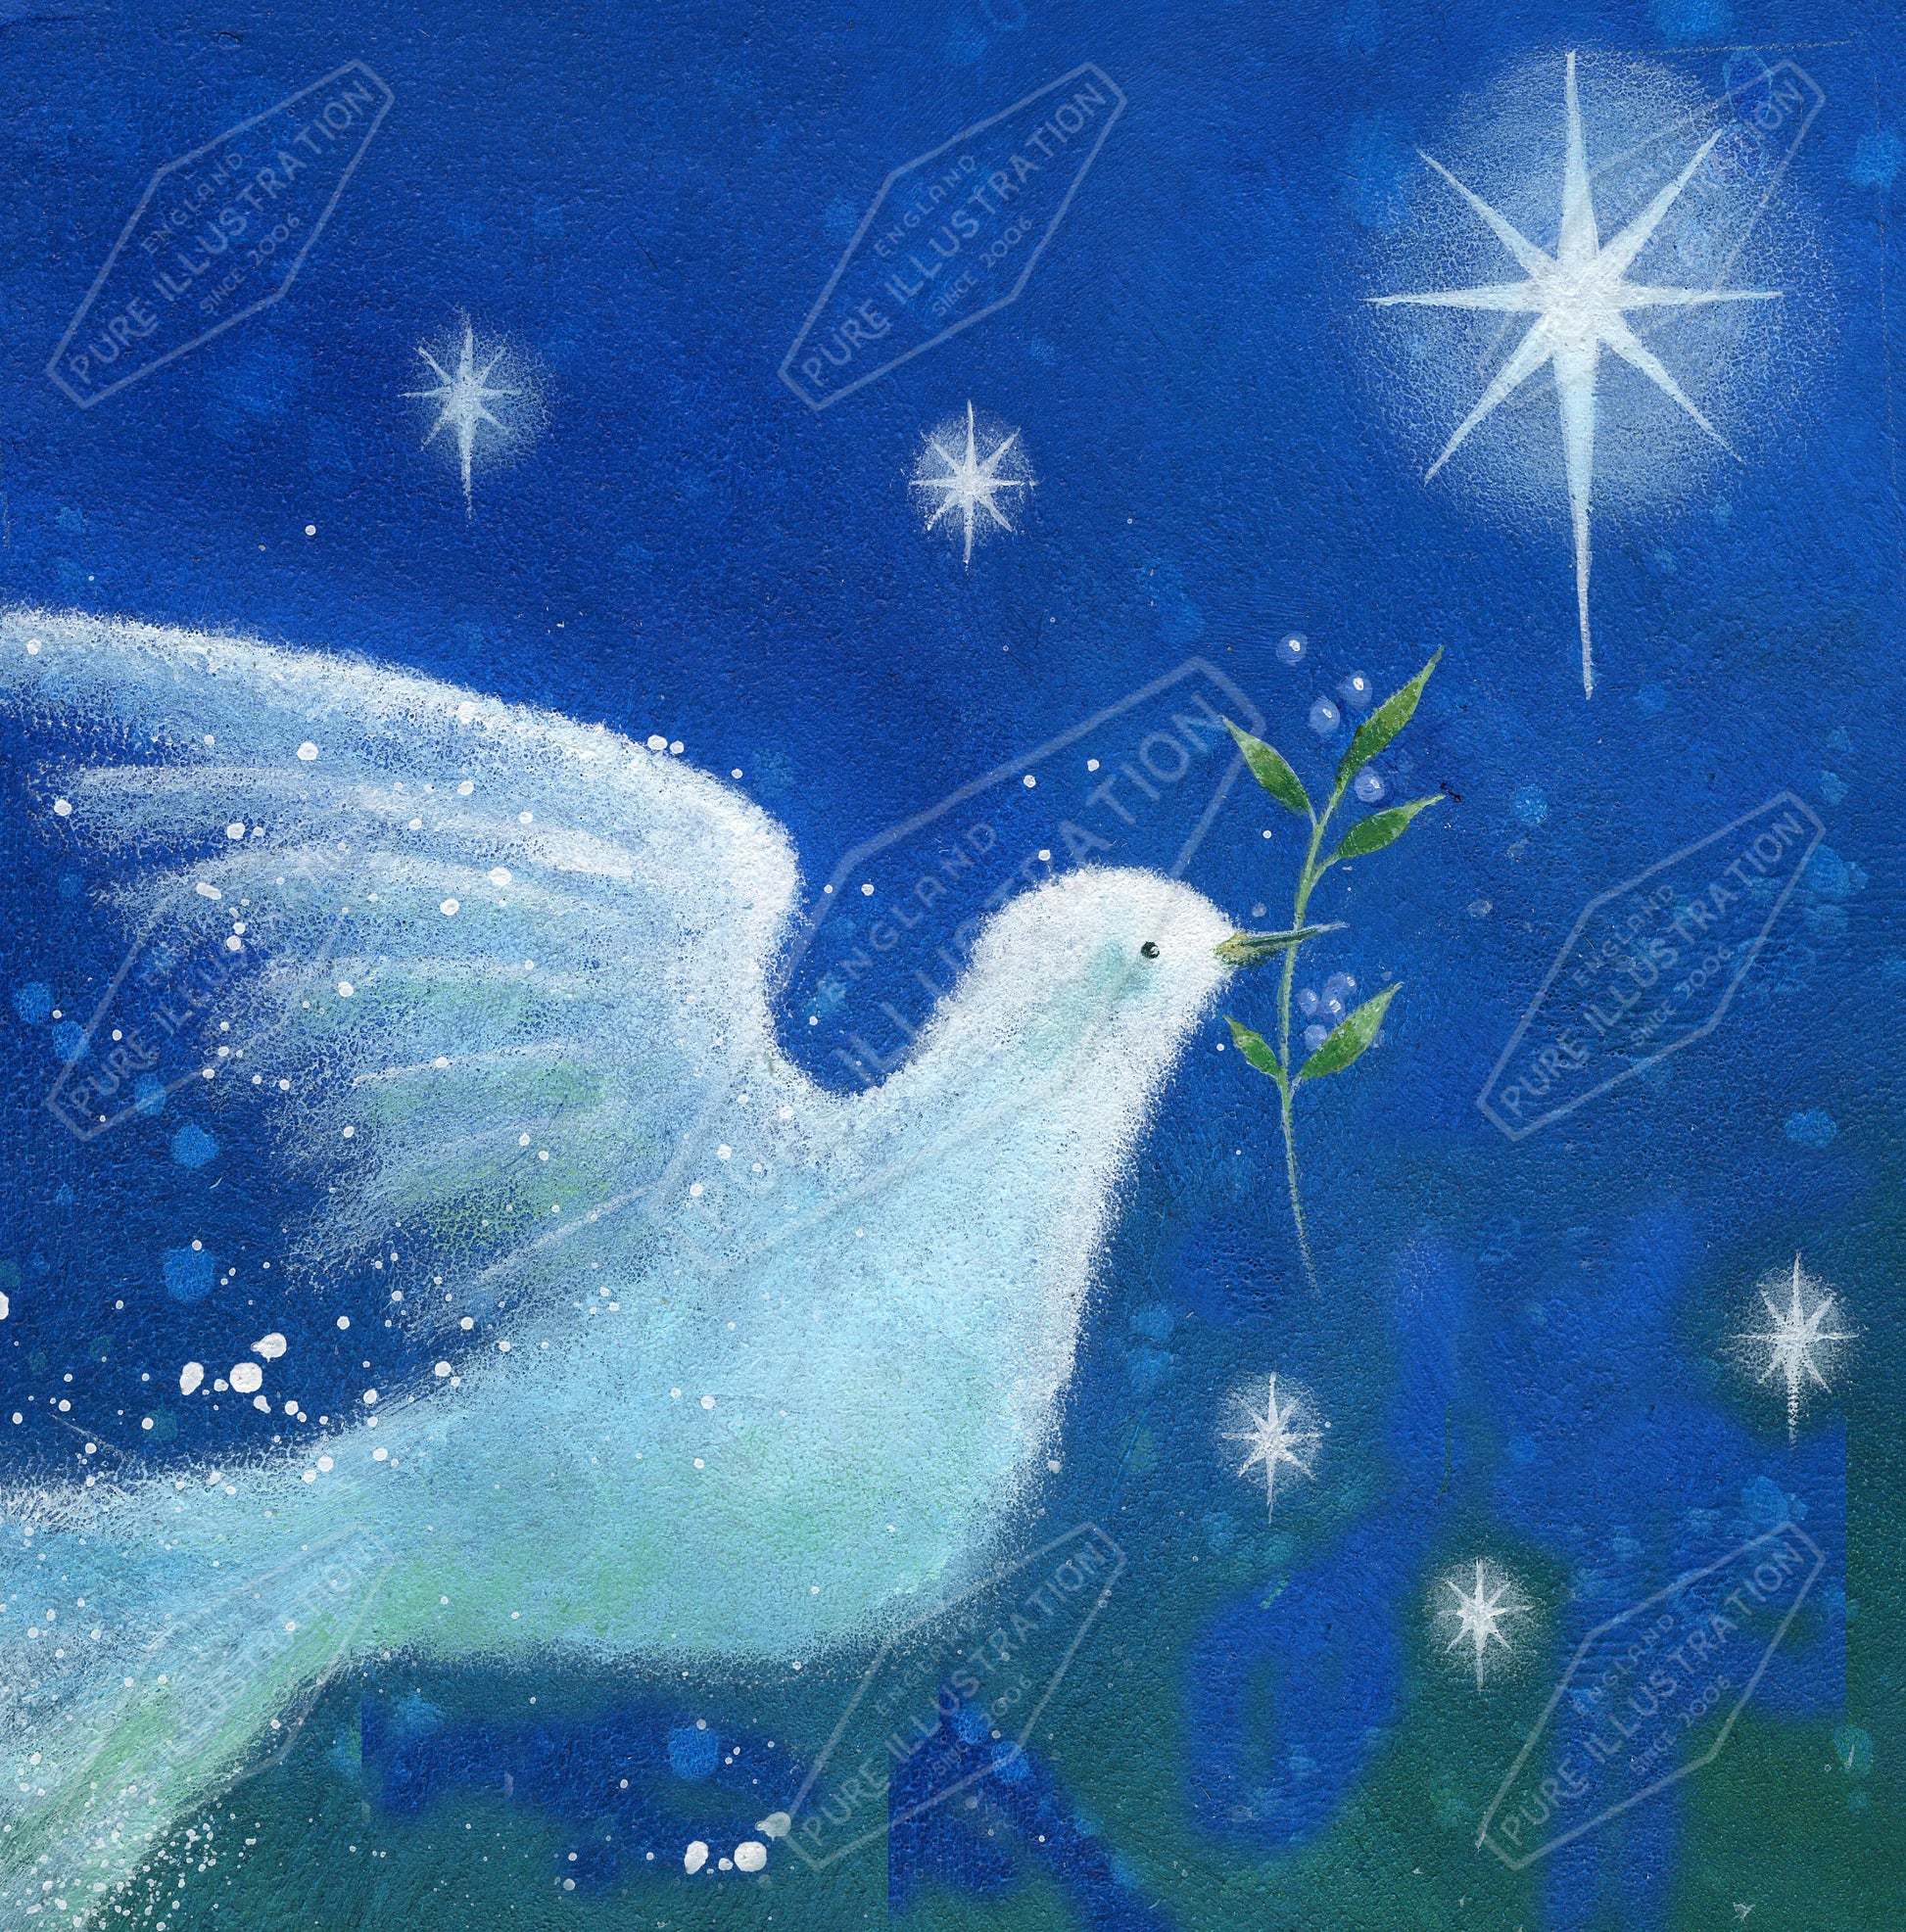 00010899JPA- Jan Pashley is represented by Pure Art Licensing Agency - Christmas Greeting Card Design